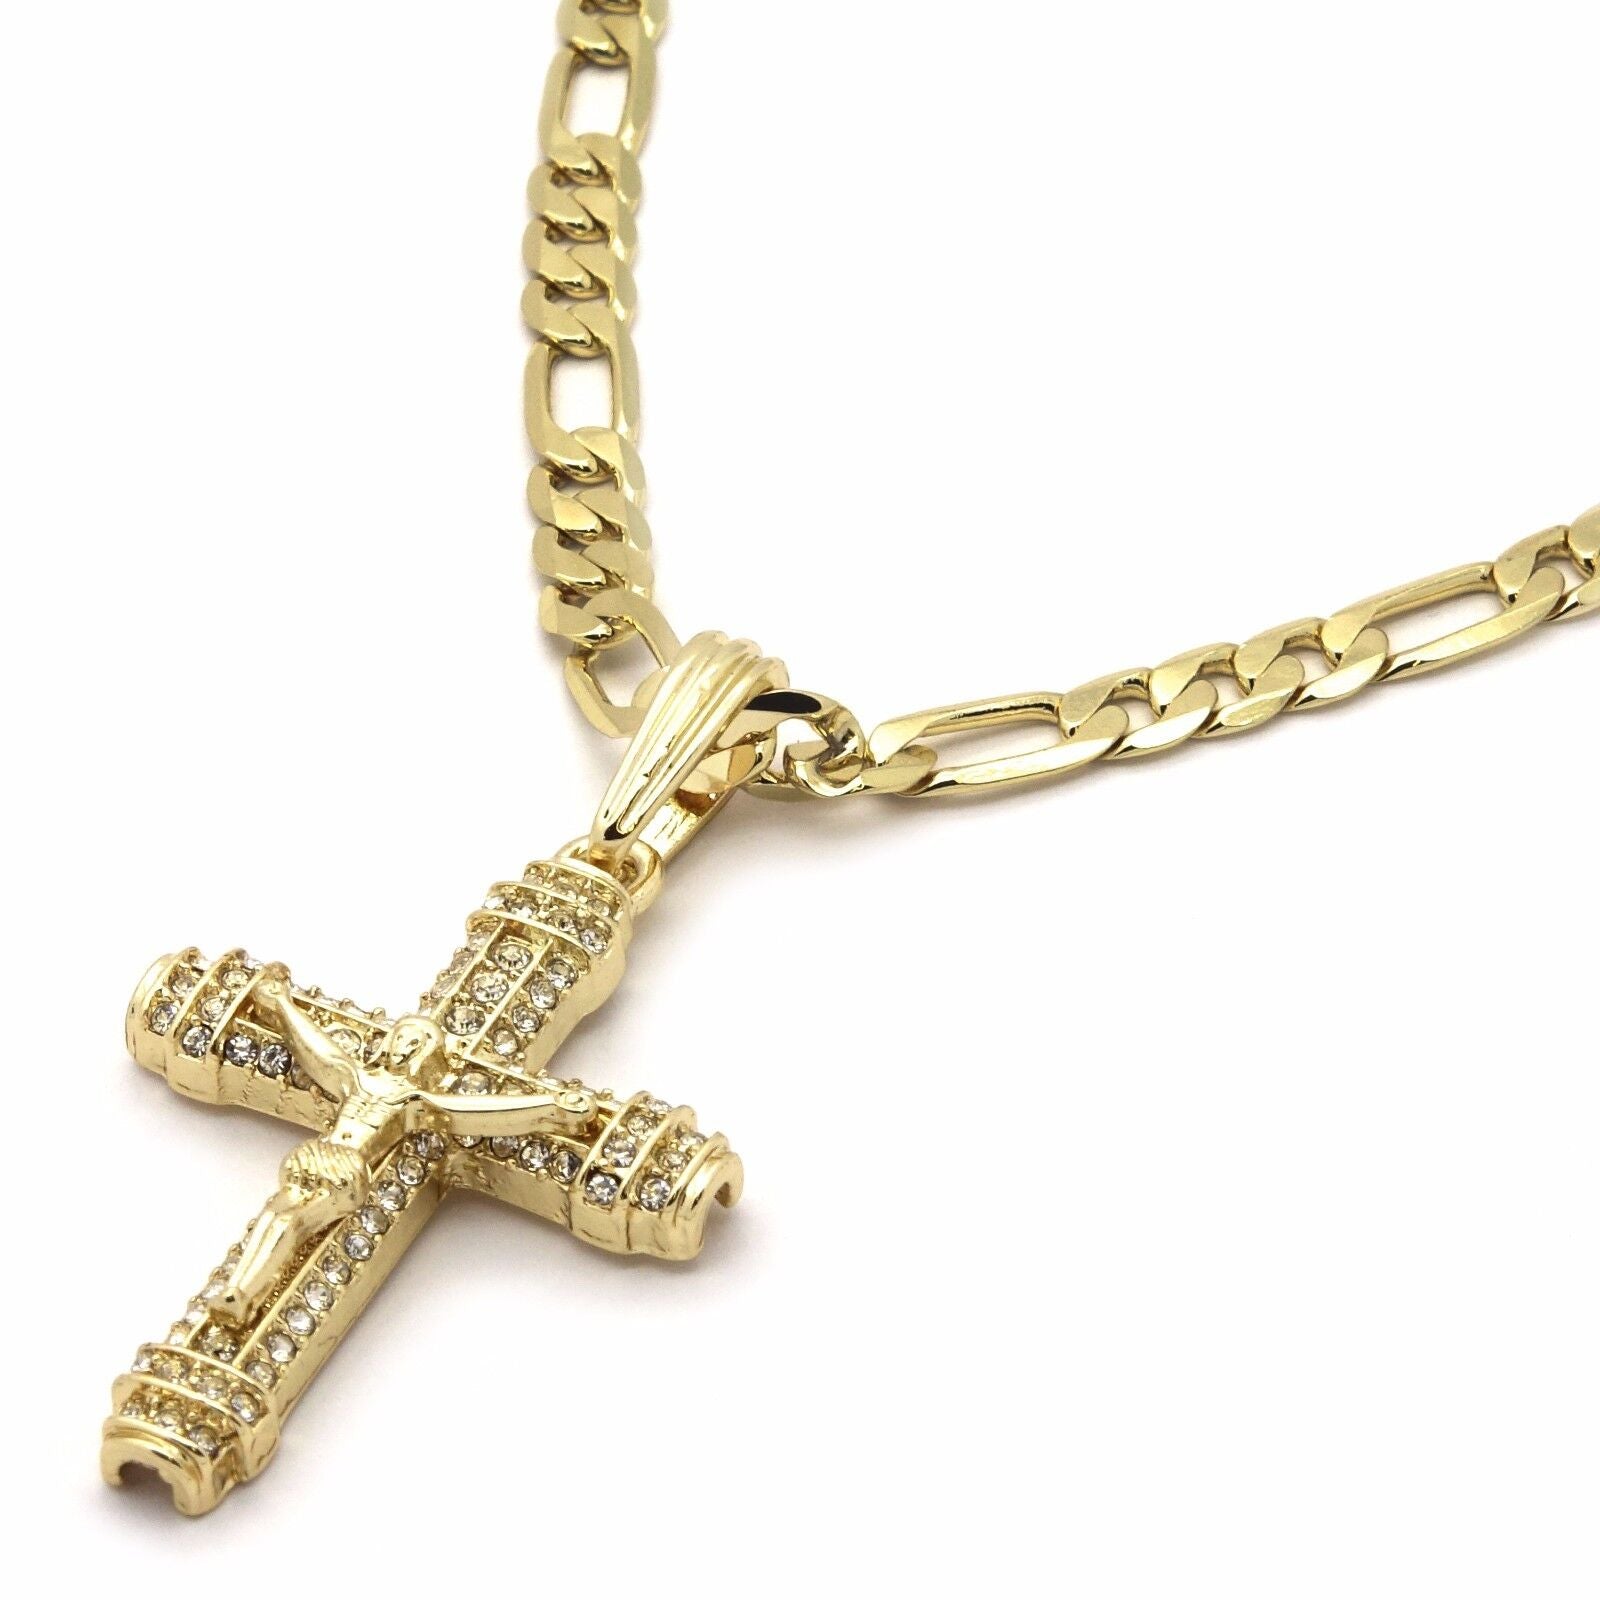 Men’s Cross Necklace and Gold-Plated Chain